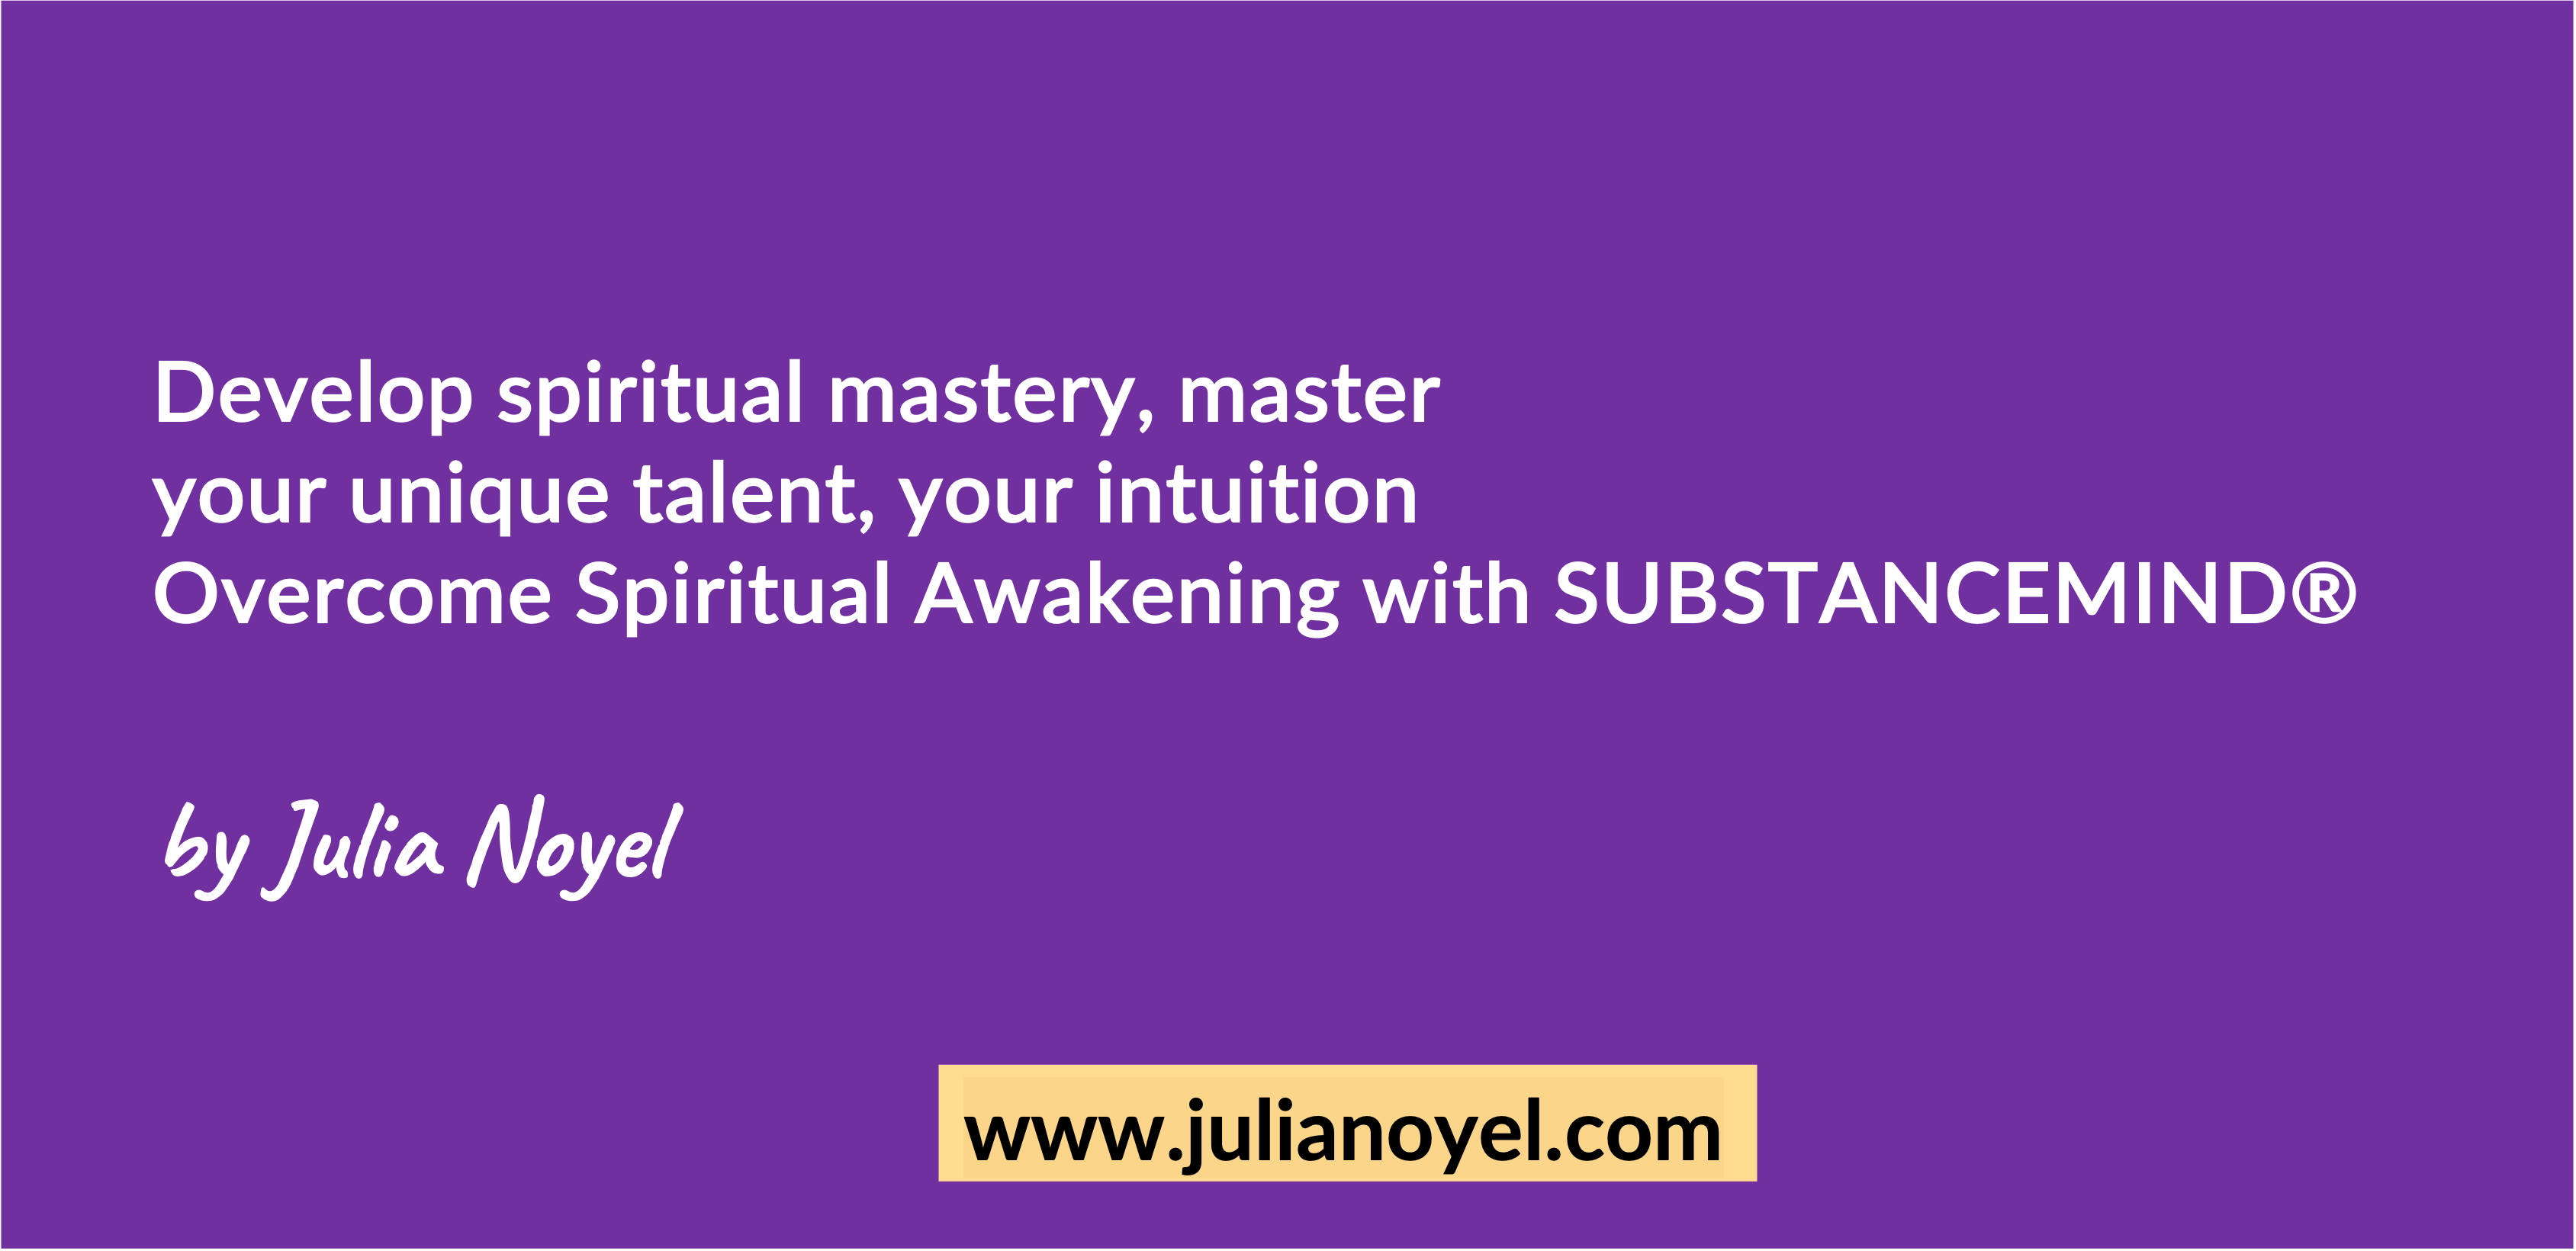 Develop spiritual mastery, master your unique talent, your intuition Overcome Spiritual Awakening with SUBSTANCEMIND®